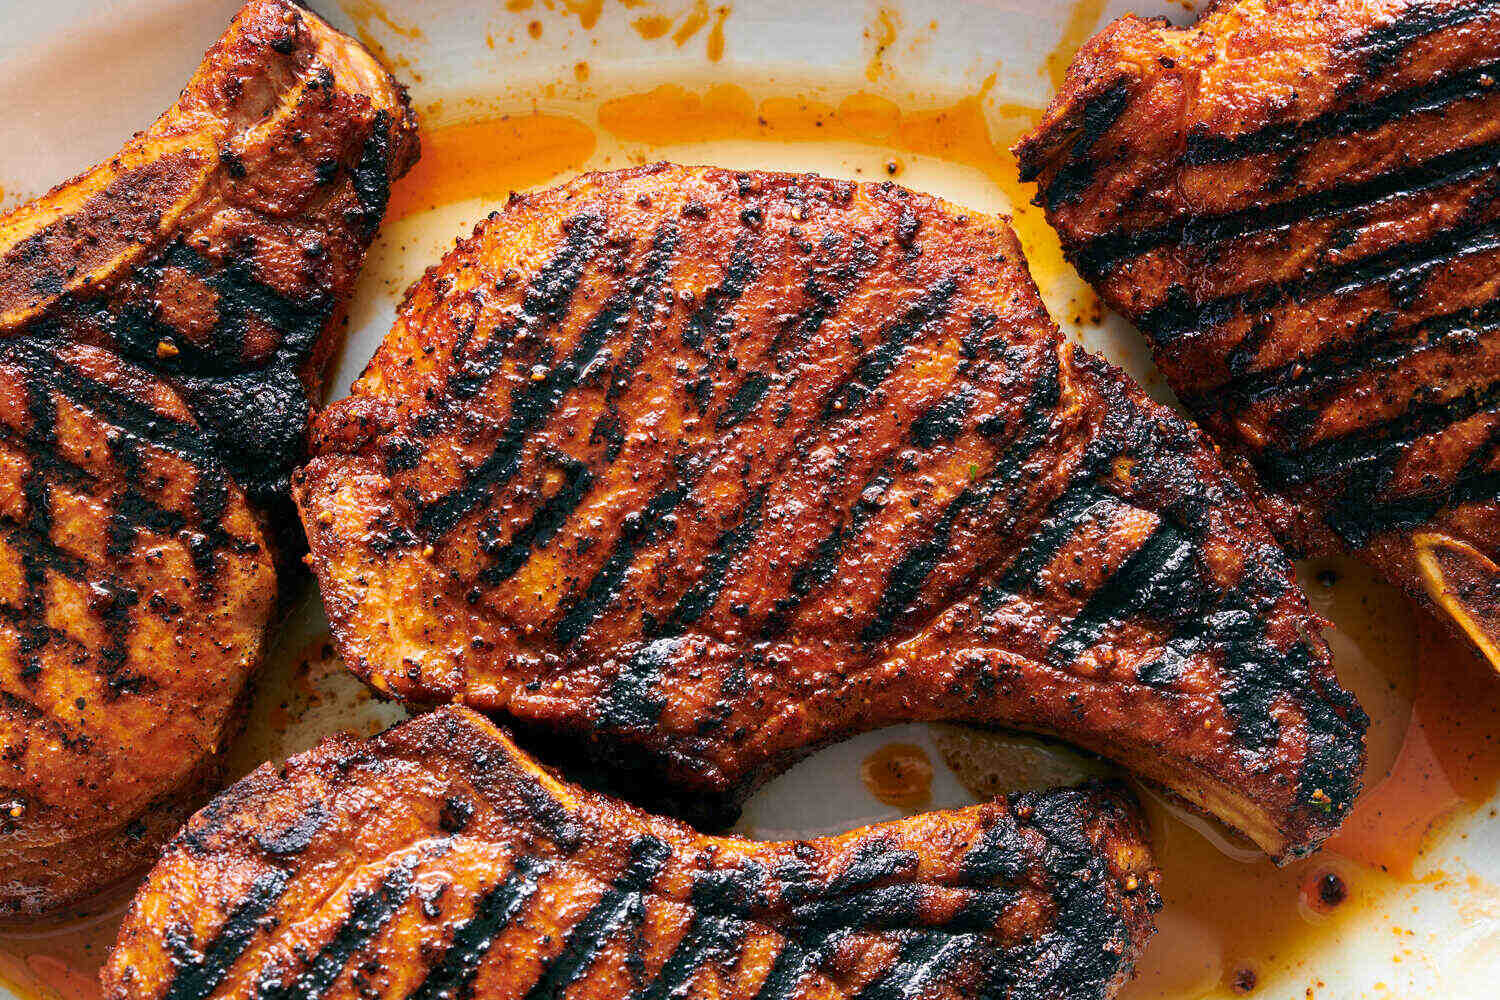 How To Grill Juicy Pork Chops On A Grill - Recipes.net